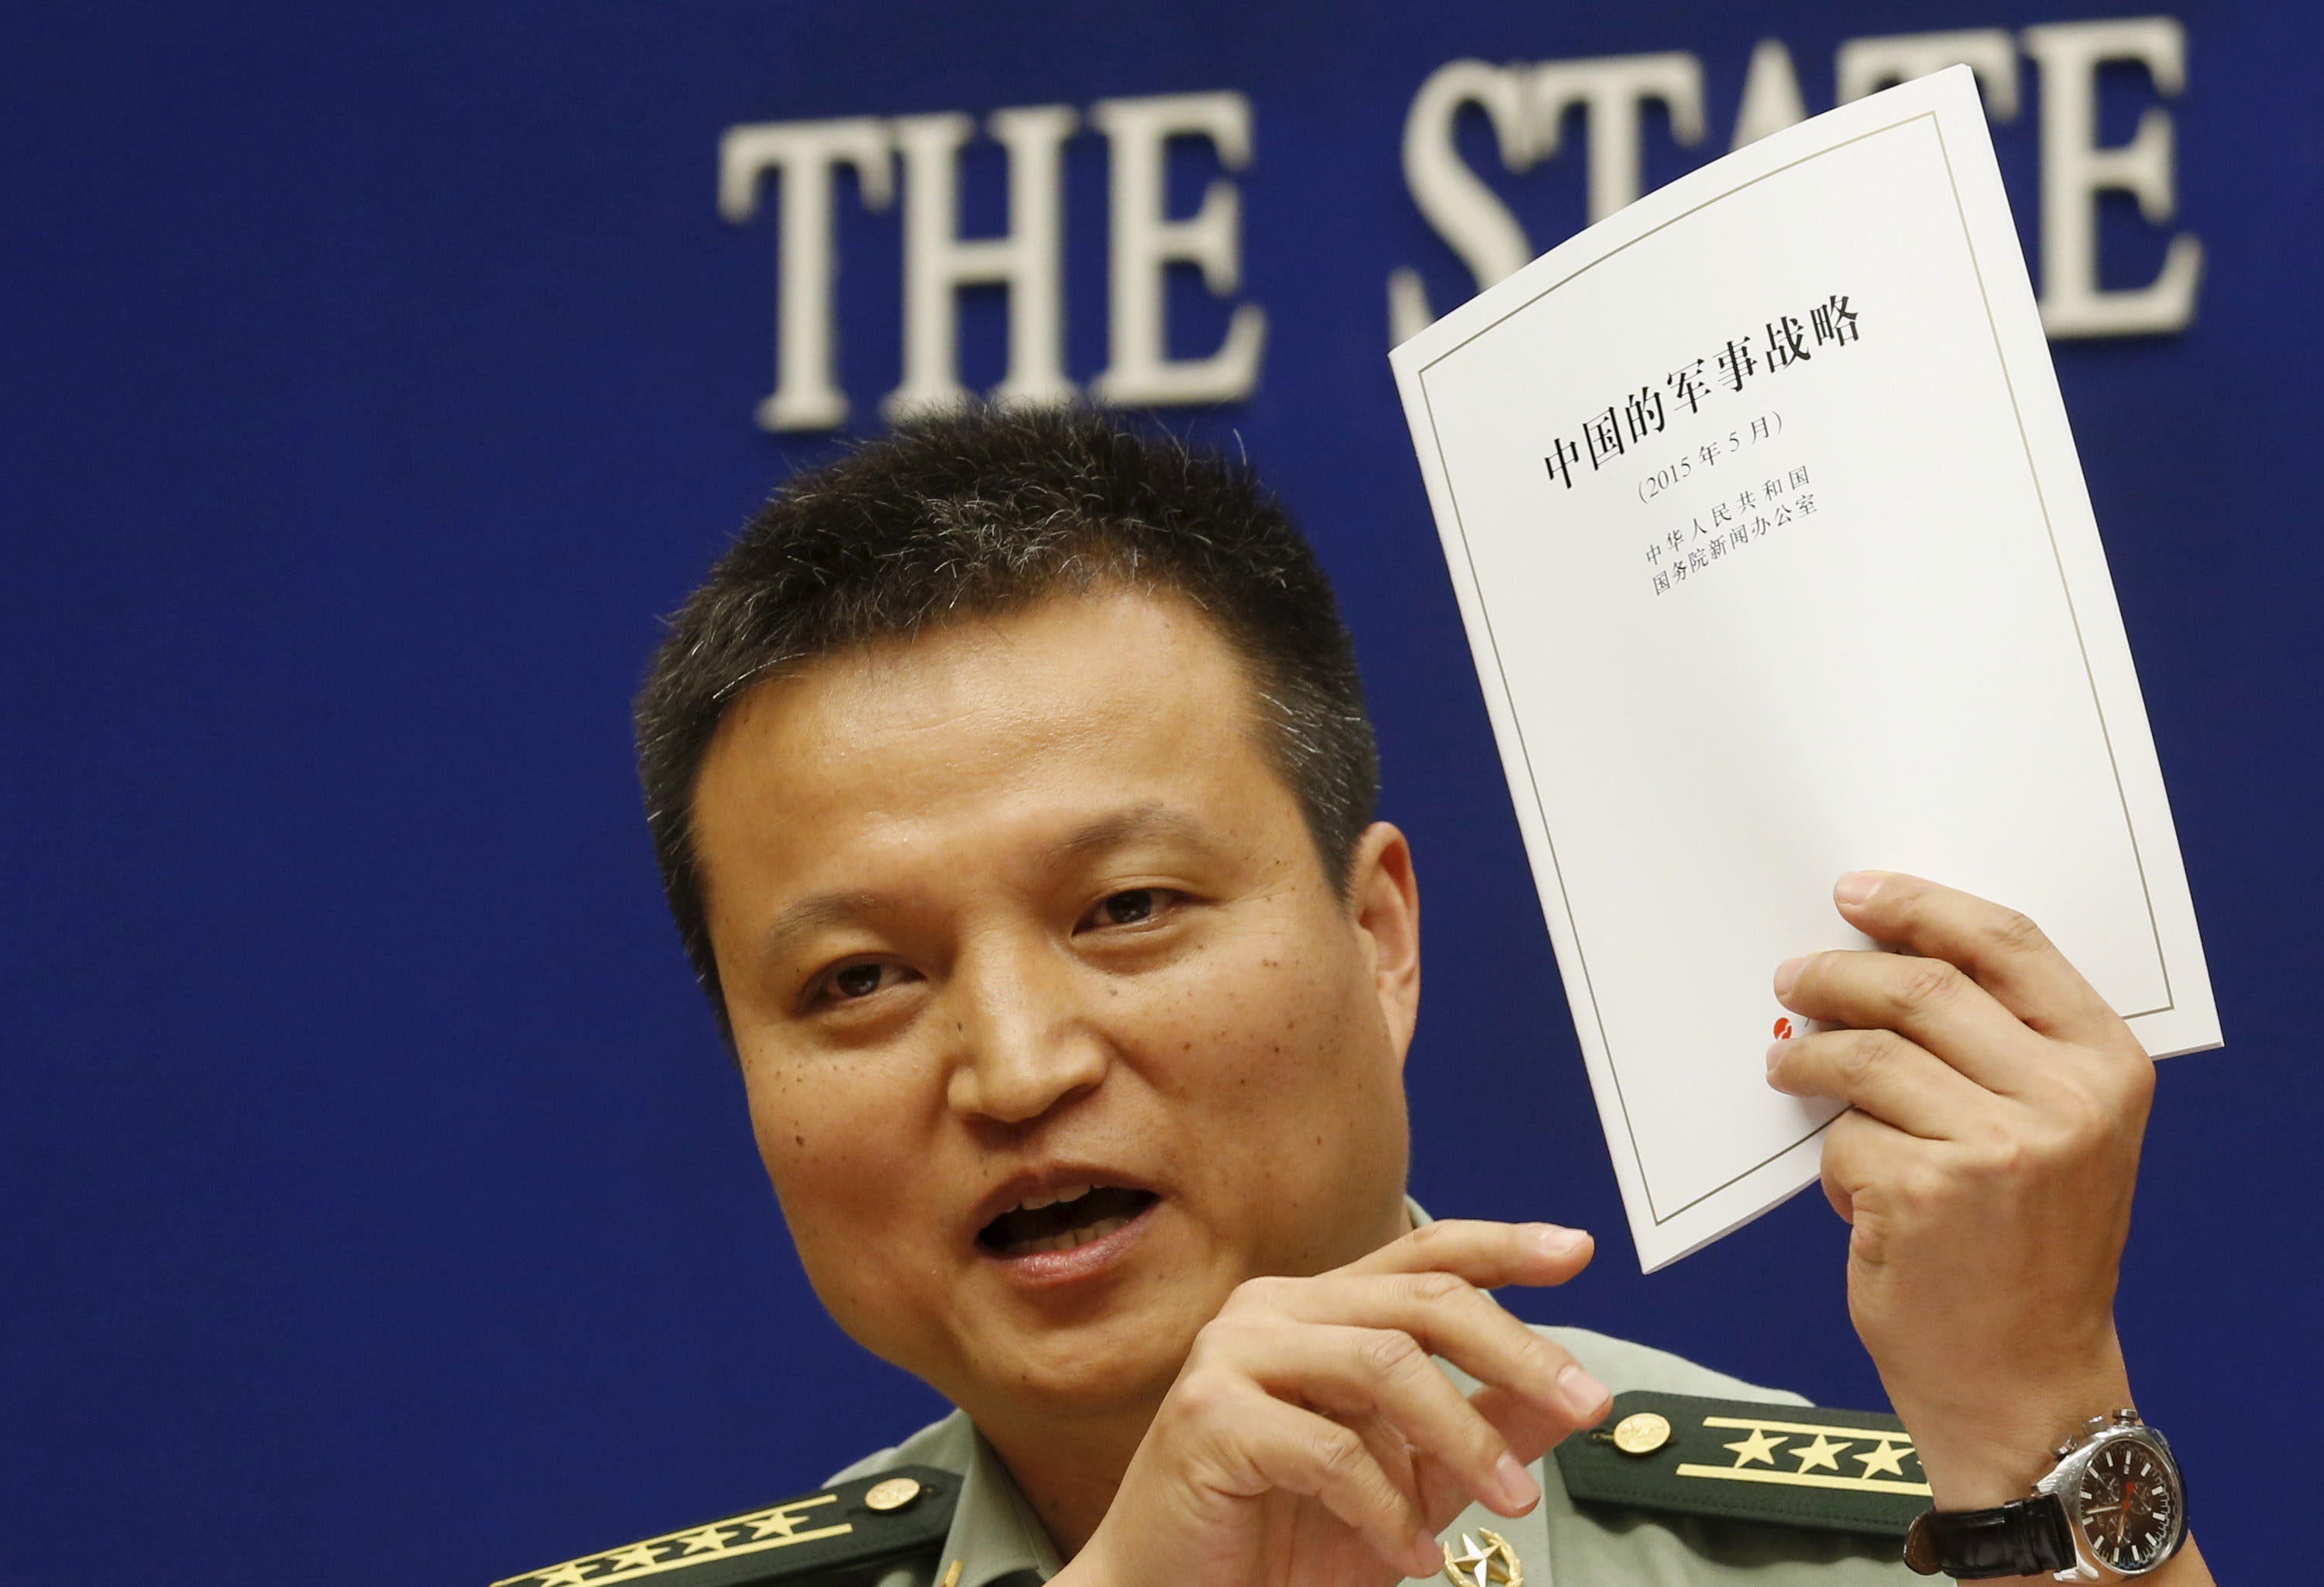 Spokesperson of Chinese Ministry of National Defense Senior Colonel Yang holds a copy of the annual white paper on China's military strategy during a news conference in Beijing